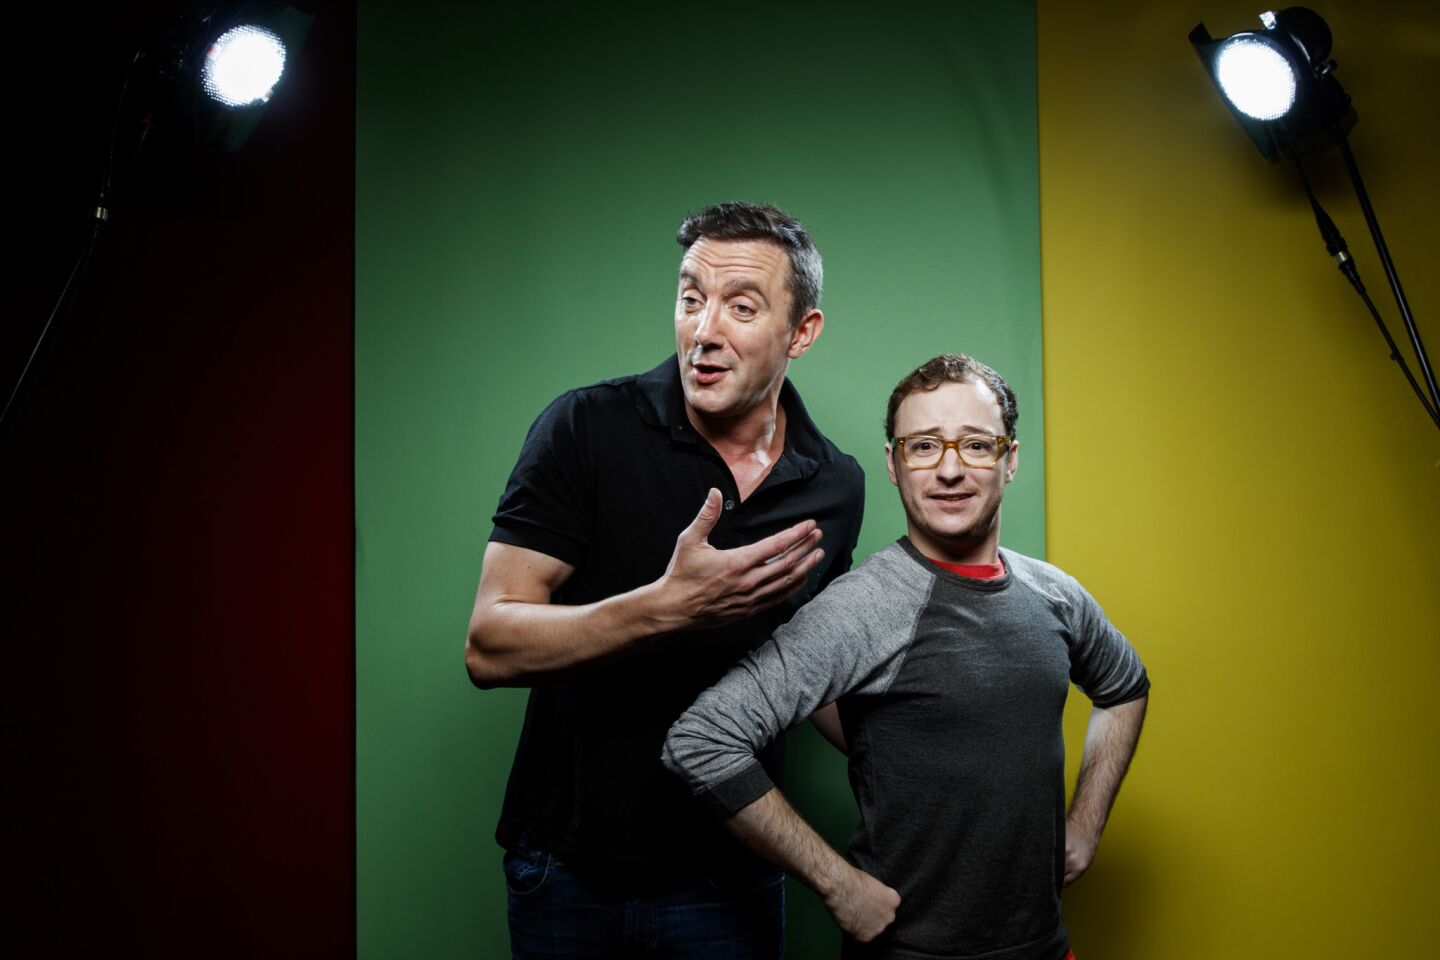 Peter Serafinowicz and Griffin Newman, from the television series "The Tick," photographed in the L.A. Times photo studio at Comic-Con 2017.